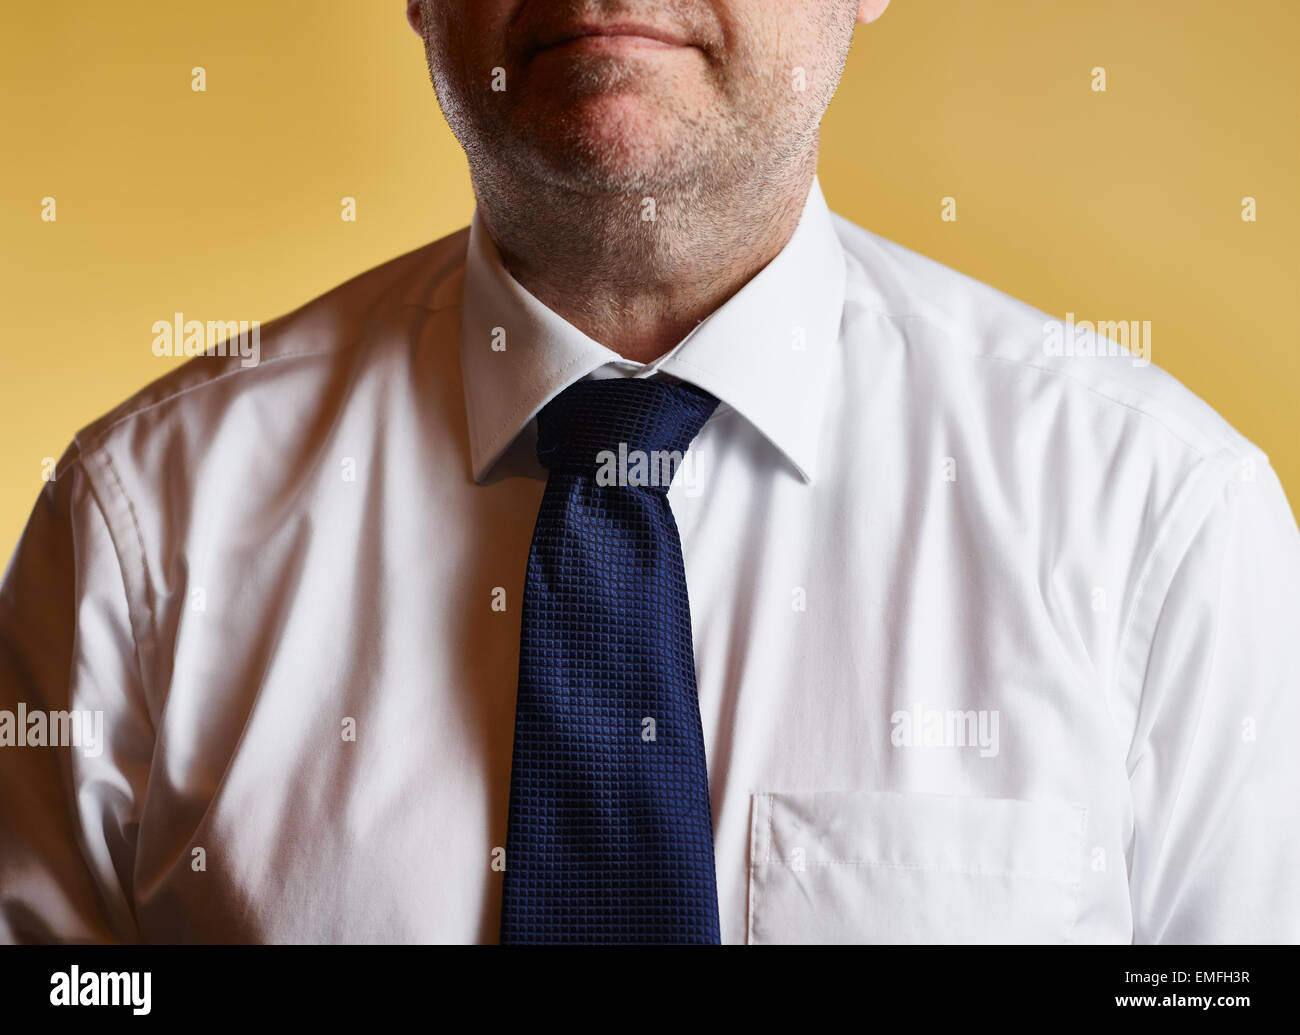 Close up, male wearing white shirt and blue tie, yellow background Stock Photo